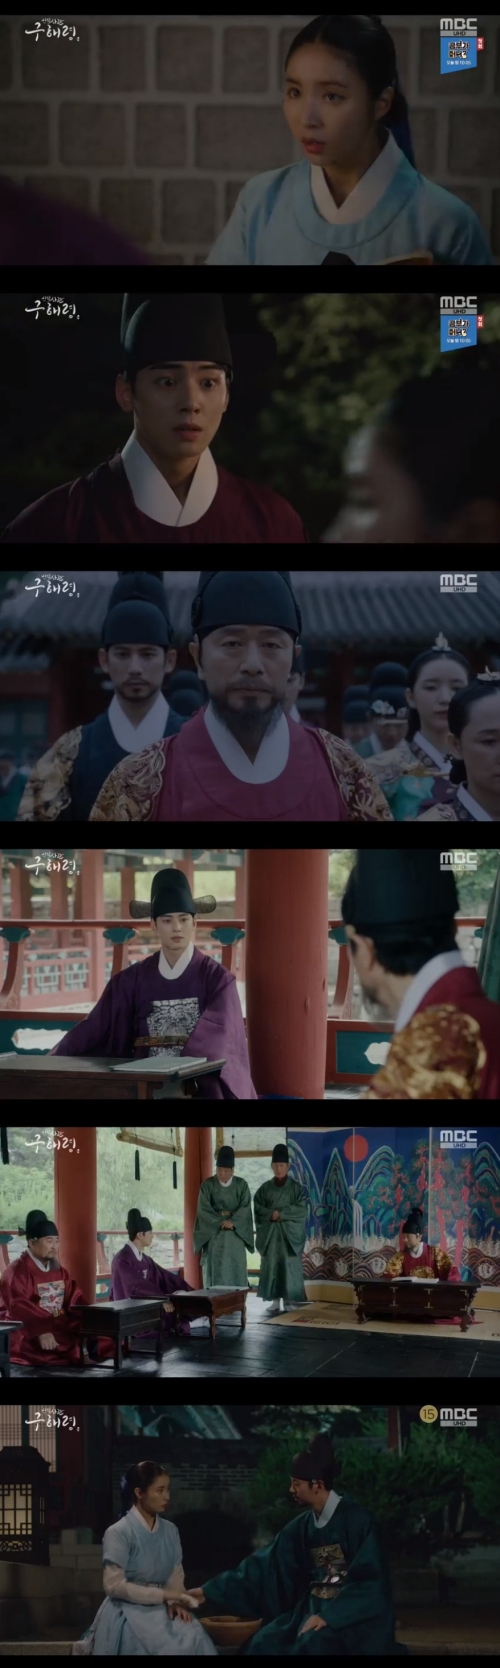 Shin Se-kyung, a new officer Rookie Historian Goo Hae-ryung, beat Kim Min-Sang.In the 23rd and 24th MBC tree drama New Entrepreneur Rookie Historian Goe-ryung broadcast on the 22nd, there was a fight between King Lee Tae (Kim Min-Sang) Rookie Historian Goo Hae-ryung (Shin Se-kyung).On this day, Lee Lim (Cha Eun-woo) was embarrassed and prepared for the preparation, because it was the first time in 20 years.Rookie Historian Goo Hae-ryung also received an invitation to enter the room and faced Irim while heading to the preparations, and expressed confusion about what the situation was.The same thing was that Im (Kim Yeo-jin) also doubted what the wind was blowing on the king.He pointed out that he had not raised the text by receiving greetings from the king, the couple of the taxa, and the Taoist, and the king promised to raise the text before the same time every morning.The king was also heard in the contest.When I heard about the six closings of the king, the theme of the Wang Yi contest, I asked Irim for his opinion, and Irim replied, I think the King is three out of six.Lee pointed out that he was confronted with the entrance of Wang Yi officers, ordered Seung Jung Won to inspect the officer, and was angry at the entrance of the wife.The king said, The city is very honest because it resembles a fruit, and it is like the Sejo of Joseon in this country, Sejo of Joseon.The king later questioned Lee Jin by saying, The city has a good diet and distribution, the blood does not go anywhere.He also said that for the time being, Intimacy had bitten Lee Jin, saying he would see it, and Rookie Historian Goo Hae-ryung ordered him to follow him and write a book.Rookie Historian Goo Hae-ryung was haunted by hard work all day, perplexed by the sudden orders of the king.It was because Wang Yi Rookie sent a combative Haru to pick up Rookie Historian Goo Hae-ryung.Rookie Historian Goo Hae-ryung managed to finish Haru and burst into dismay at the officers of the presbytery, saying, This is torture.Min Woo-won (Lee Ji-hoon) apologized to Rookie Historian Goo Hae-ryung for giving him advice he could give as a cadet.But Rookie Historian Goo Hae-ryung went out with a hearty voice, revealing his willingness to end the kings attitude, rather than die.Rookie Historian Goo Hae-ryung also made a meaningful statement saying that the reason for the kings harassment was not due to the precept.Later, the king and Rookie Historian Goo Hae-ryung were pictured busy days.The king woke up from dawn, raised the door, and took over the Intimacy that the taxpayer was doing, and suffered from lack of sleep.On the other hand, Rookie Historian Goo Hae-ryung was tired of the king after the kings actions in a cheerful manner.The king then advised Rookie Historian Goo Hae-ryung to drink and ordered him to be treated as a servant, not a soldier once.But Rookie Historian Goo Hae-ryung said, I have a lot of alcohol.It is no use if you want to get me drunk. He added frustration to the king by telling him that he would not open his mouth to his remorse.Eventually, the king ordered Rookie Historian Goo Hae-ryung to erase it without saying anything because he would not ask what he wrote down.Then, when I said I would listen to whatever I wanted, Rookie Historian Goo Hae-ryung asked, I will really listen to whatever I want.Rookie Historian Goo Hae-ryung then confessed that he had never written anything in his book in the first place.In the meantime, he saw the appearance of a good king as a military officer, and he embarrassed the king by revealing his belief that he would write his good figure in his rebuke.In addition, Rookie Historian Goo Hae-ryung said, So Your Grace, do not hate the officer.The officer is not the only one who writes down the fault of the king, he said. I dare ask you, do not stay away from the officer.The king laughed at the remorse of Rookie Historian Goo Hae-ryung, but finally gave the authority to enter the court without permission.The officers expressed their joy that Rookie Historian Goo Hae-ryung knew he would do it.